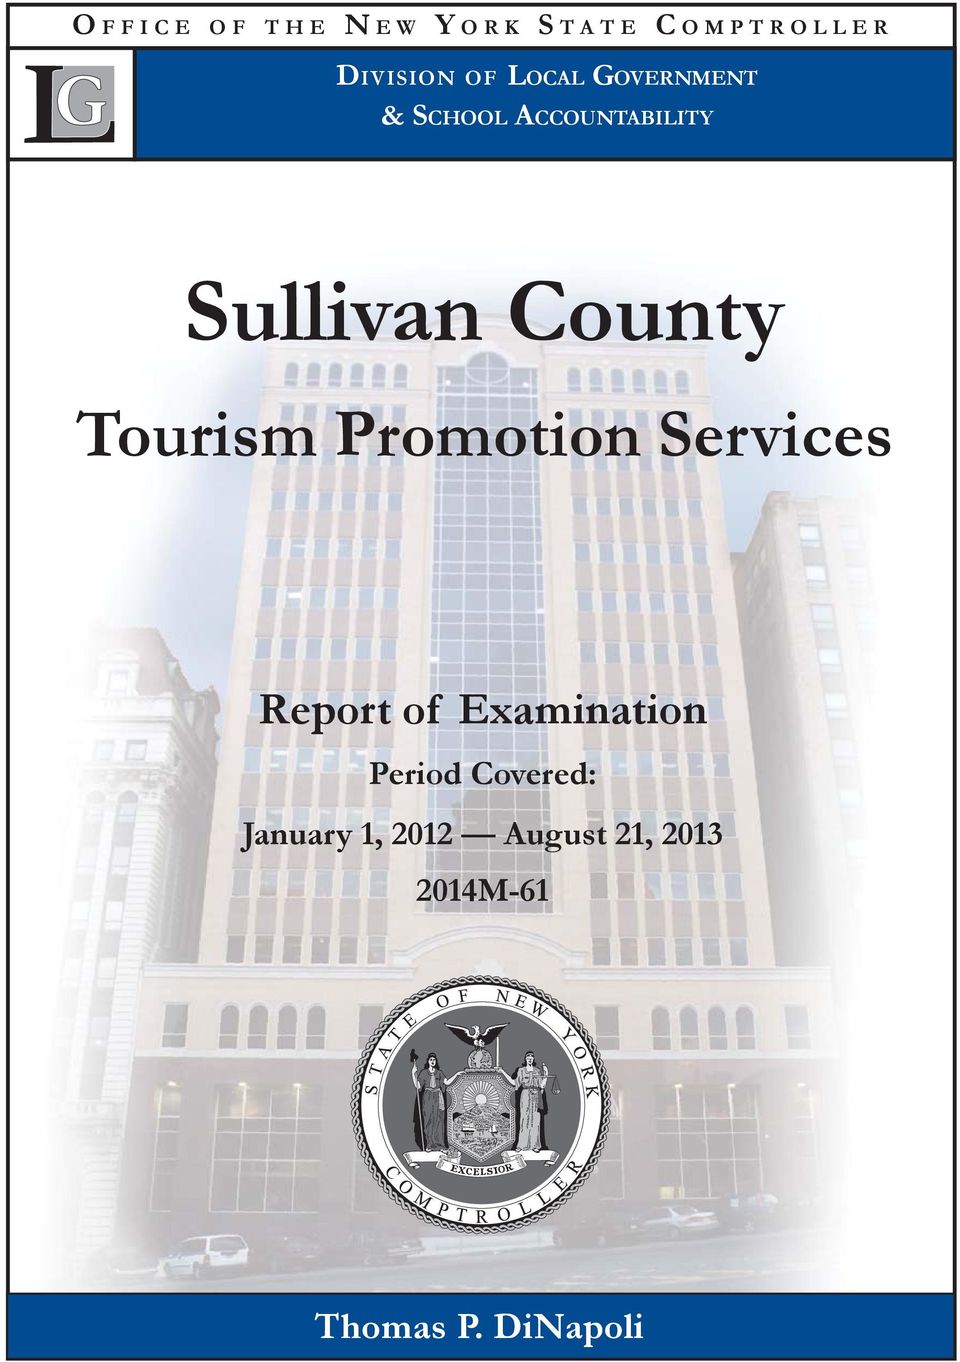 Tourism Promotion Services Report of Examination Period